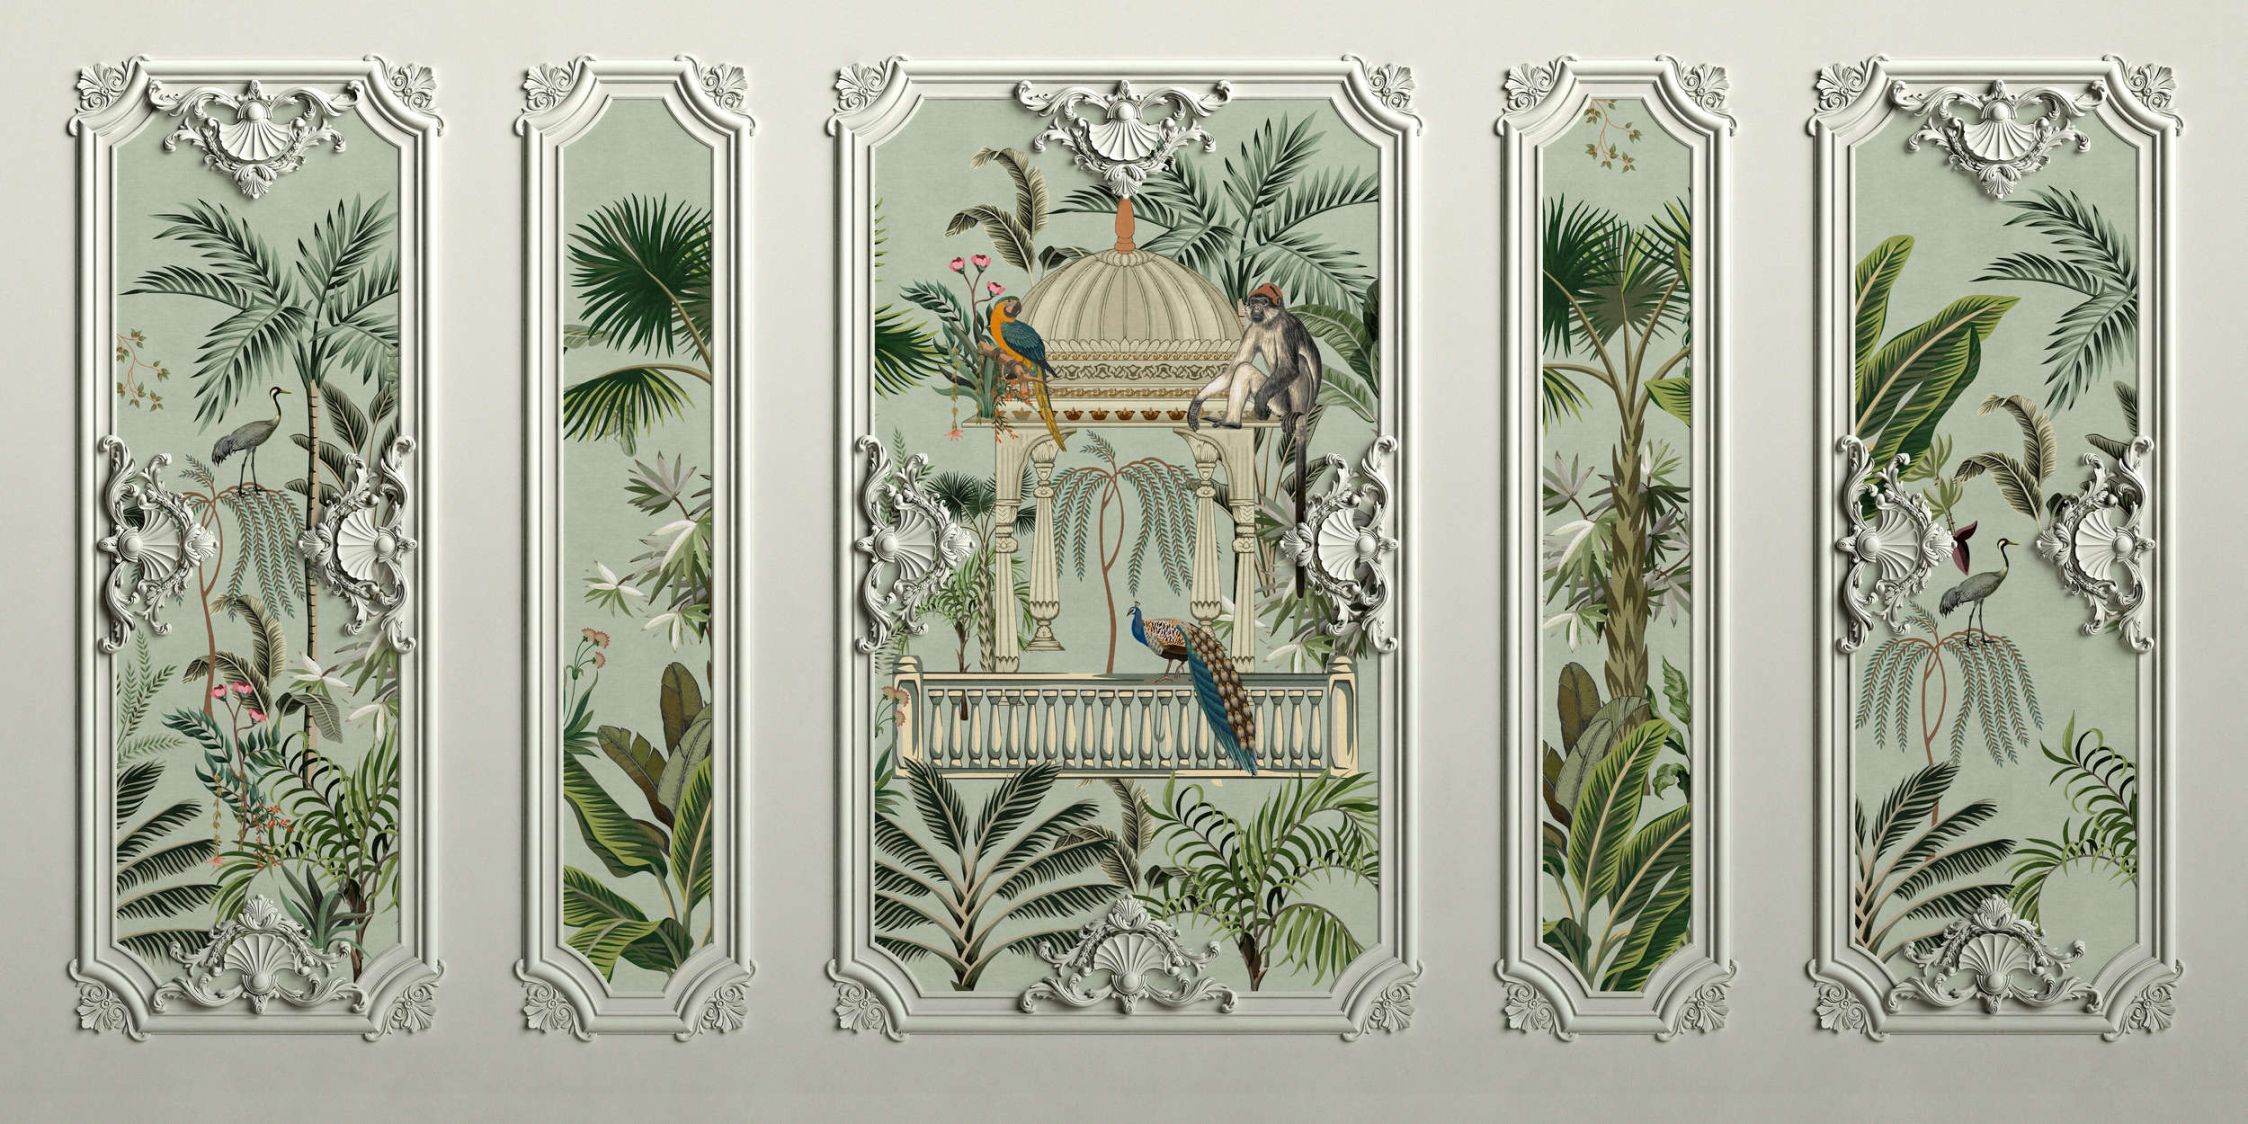             Photo wallpaper »darjeeling« - Stucco frame look with birds & palm trees with linen texture in the background - Lightly textured non-woven fabric
        